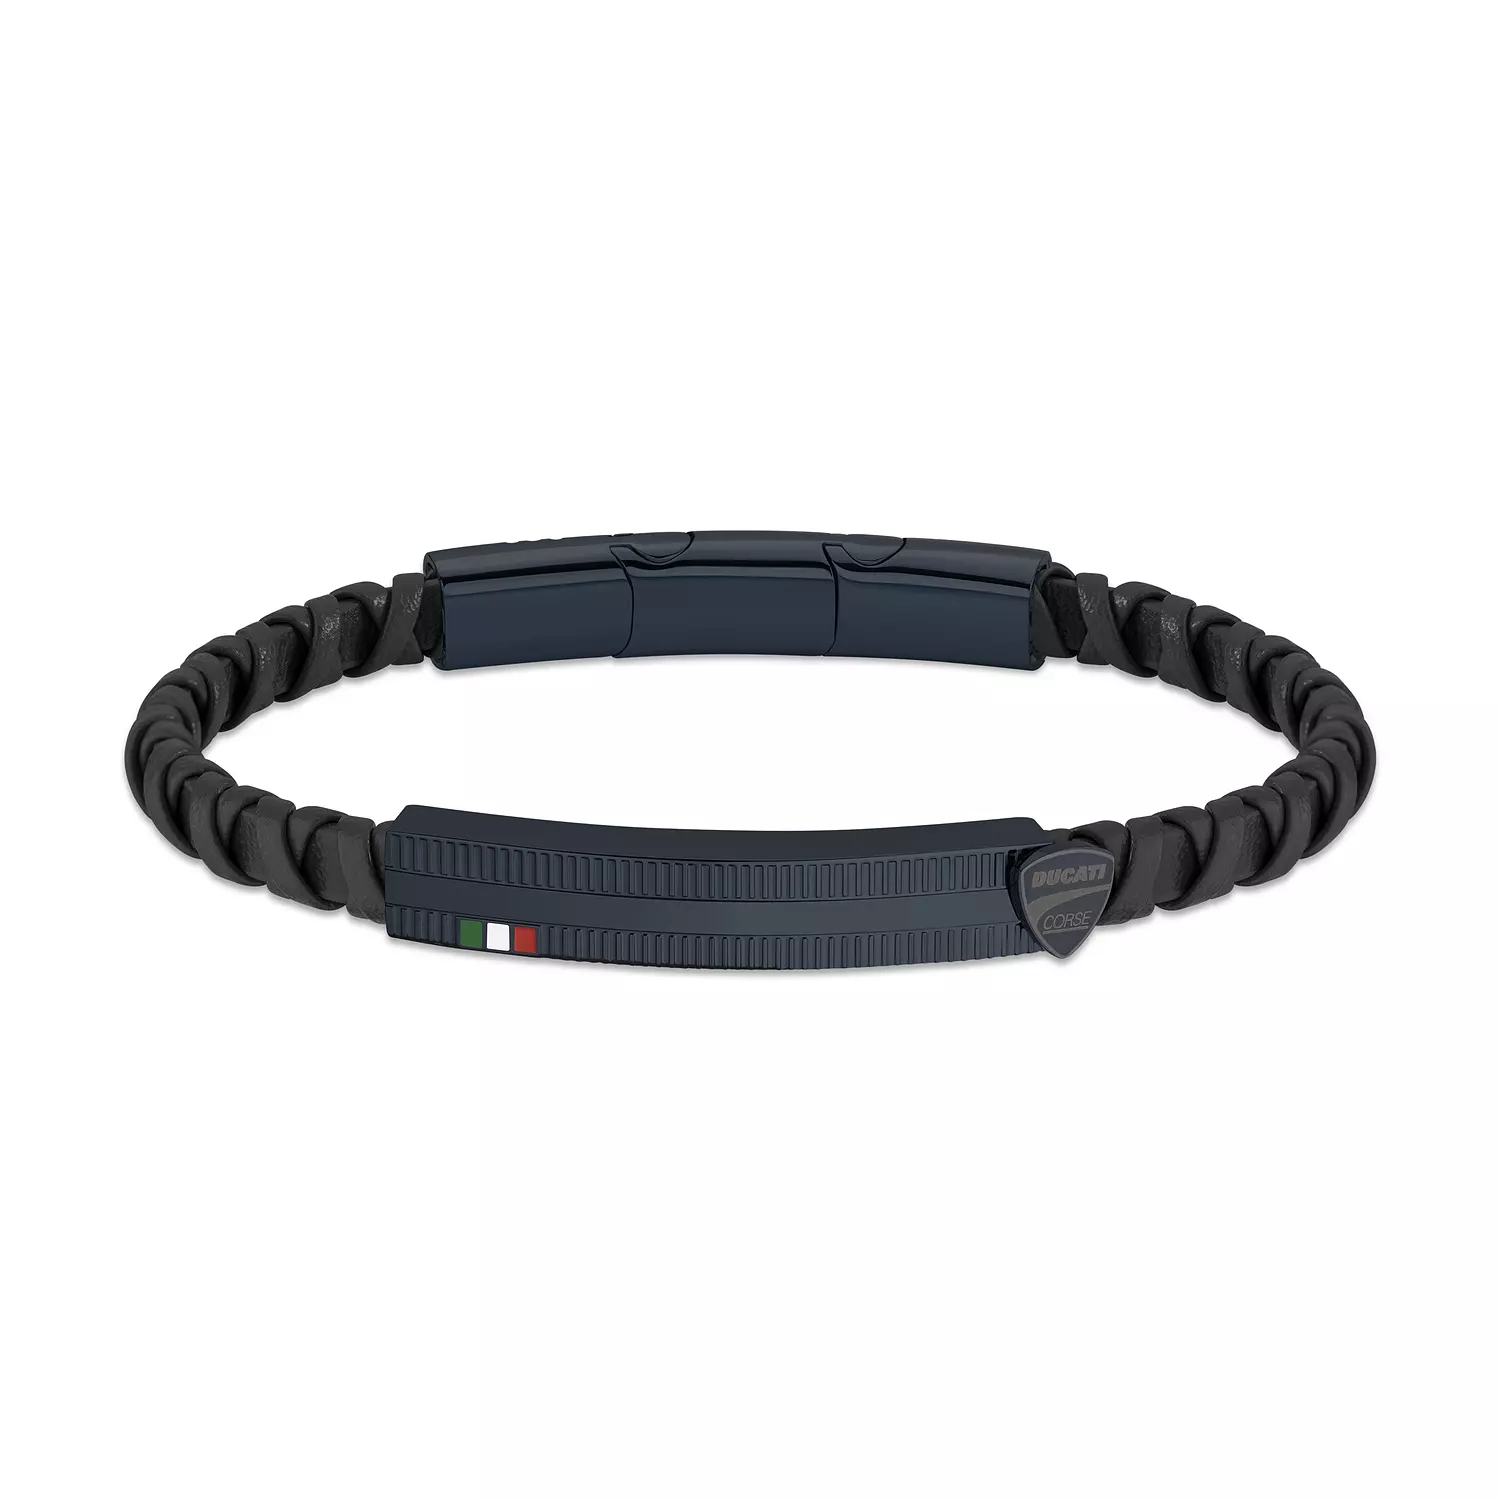 Ducati - DTAGB2137003 - INCROCIO BLACK LEATHER WITH IP BLUE BRACELET hover image